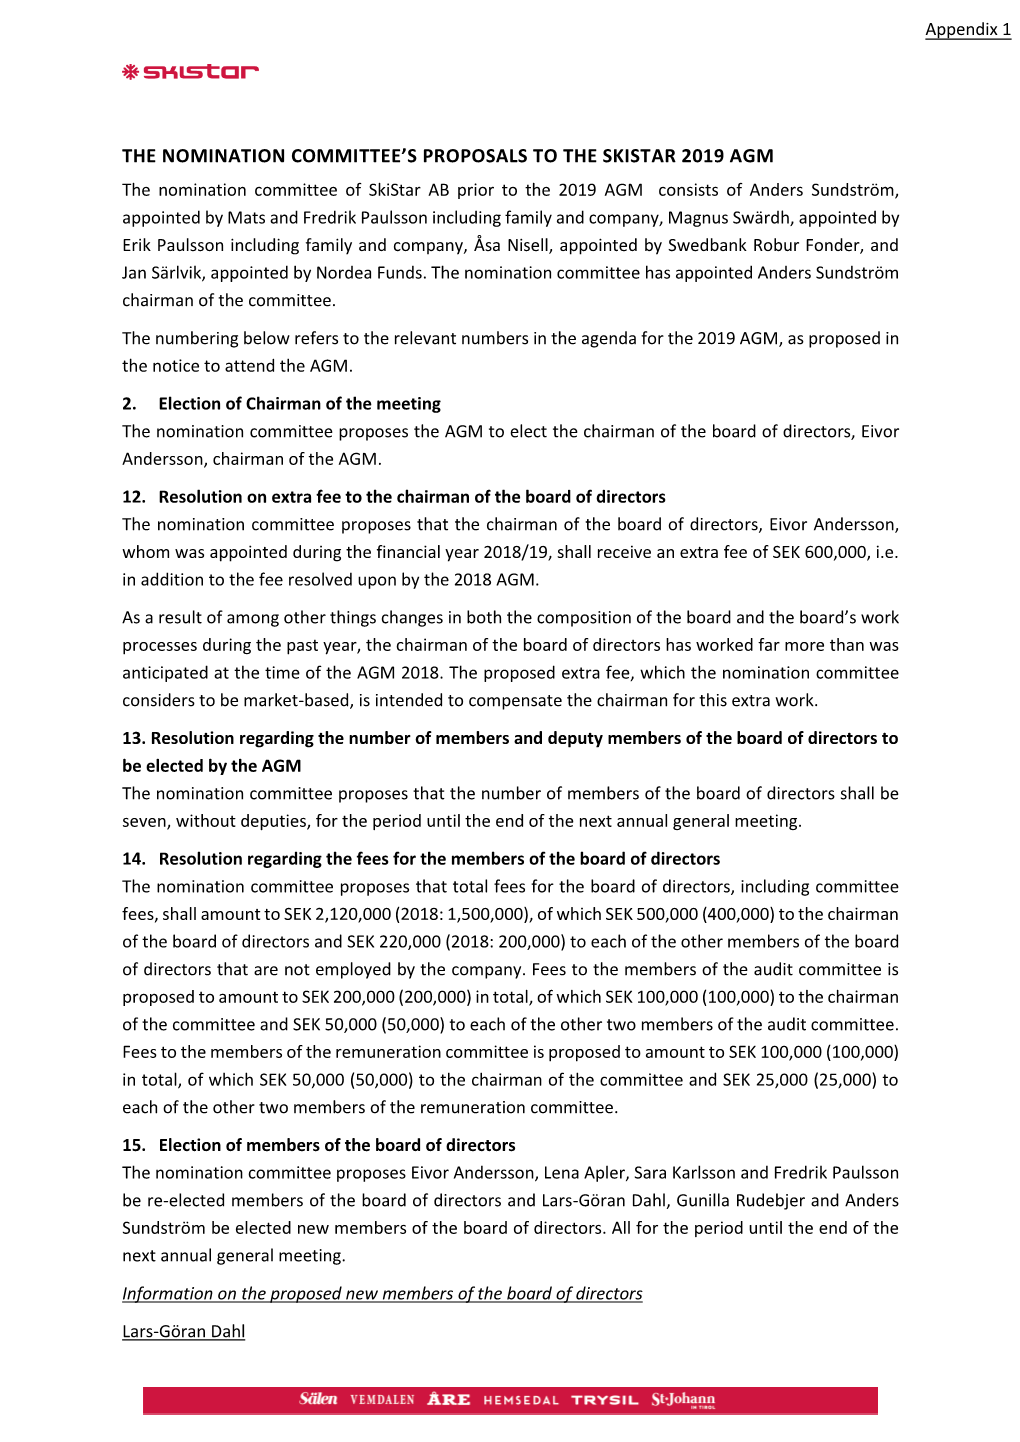 The Nomination Committee's Proposals to the Skistar